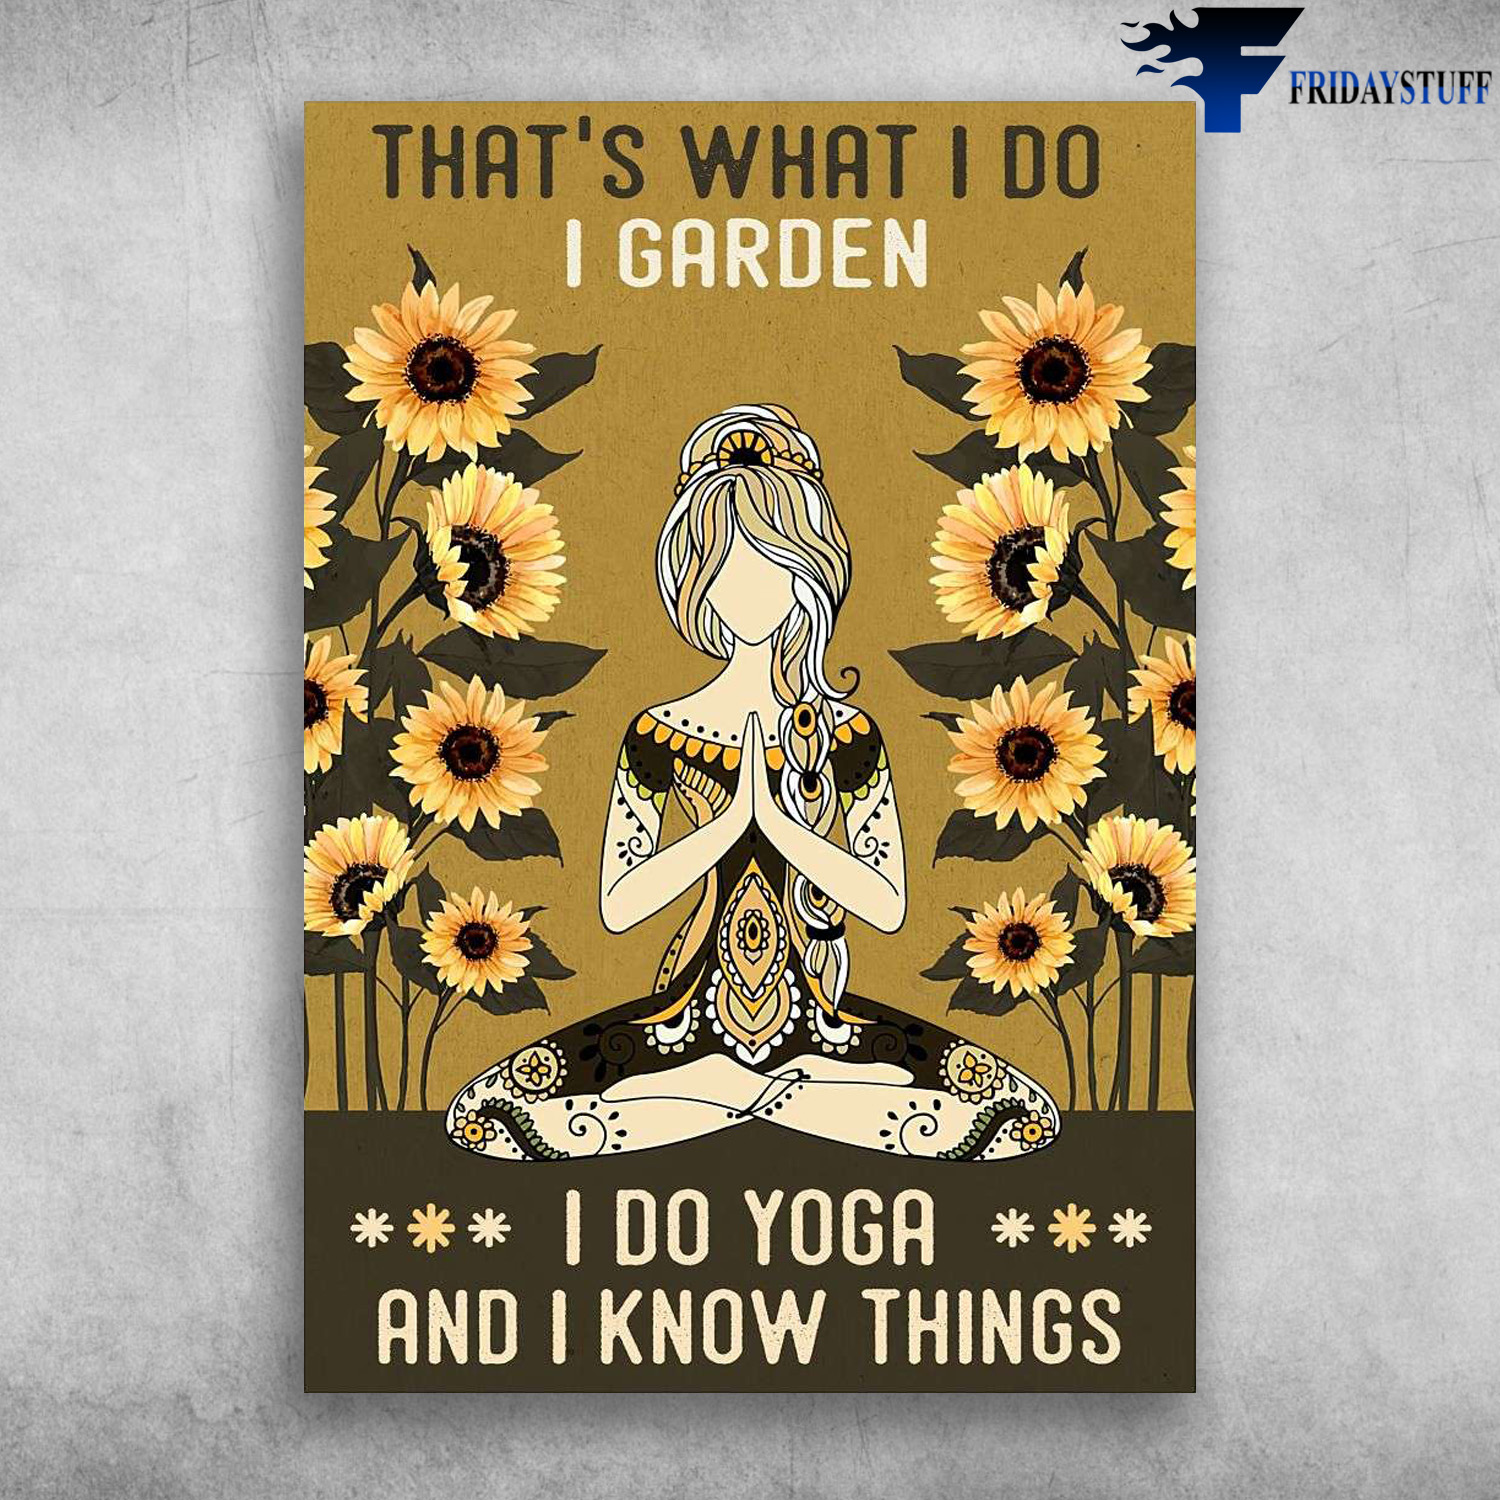 Yoga Girl, Sunflower Girl - That's What I Do, I Garden, I Do Yoga, And I Know Things